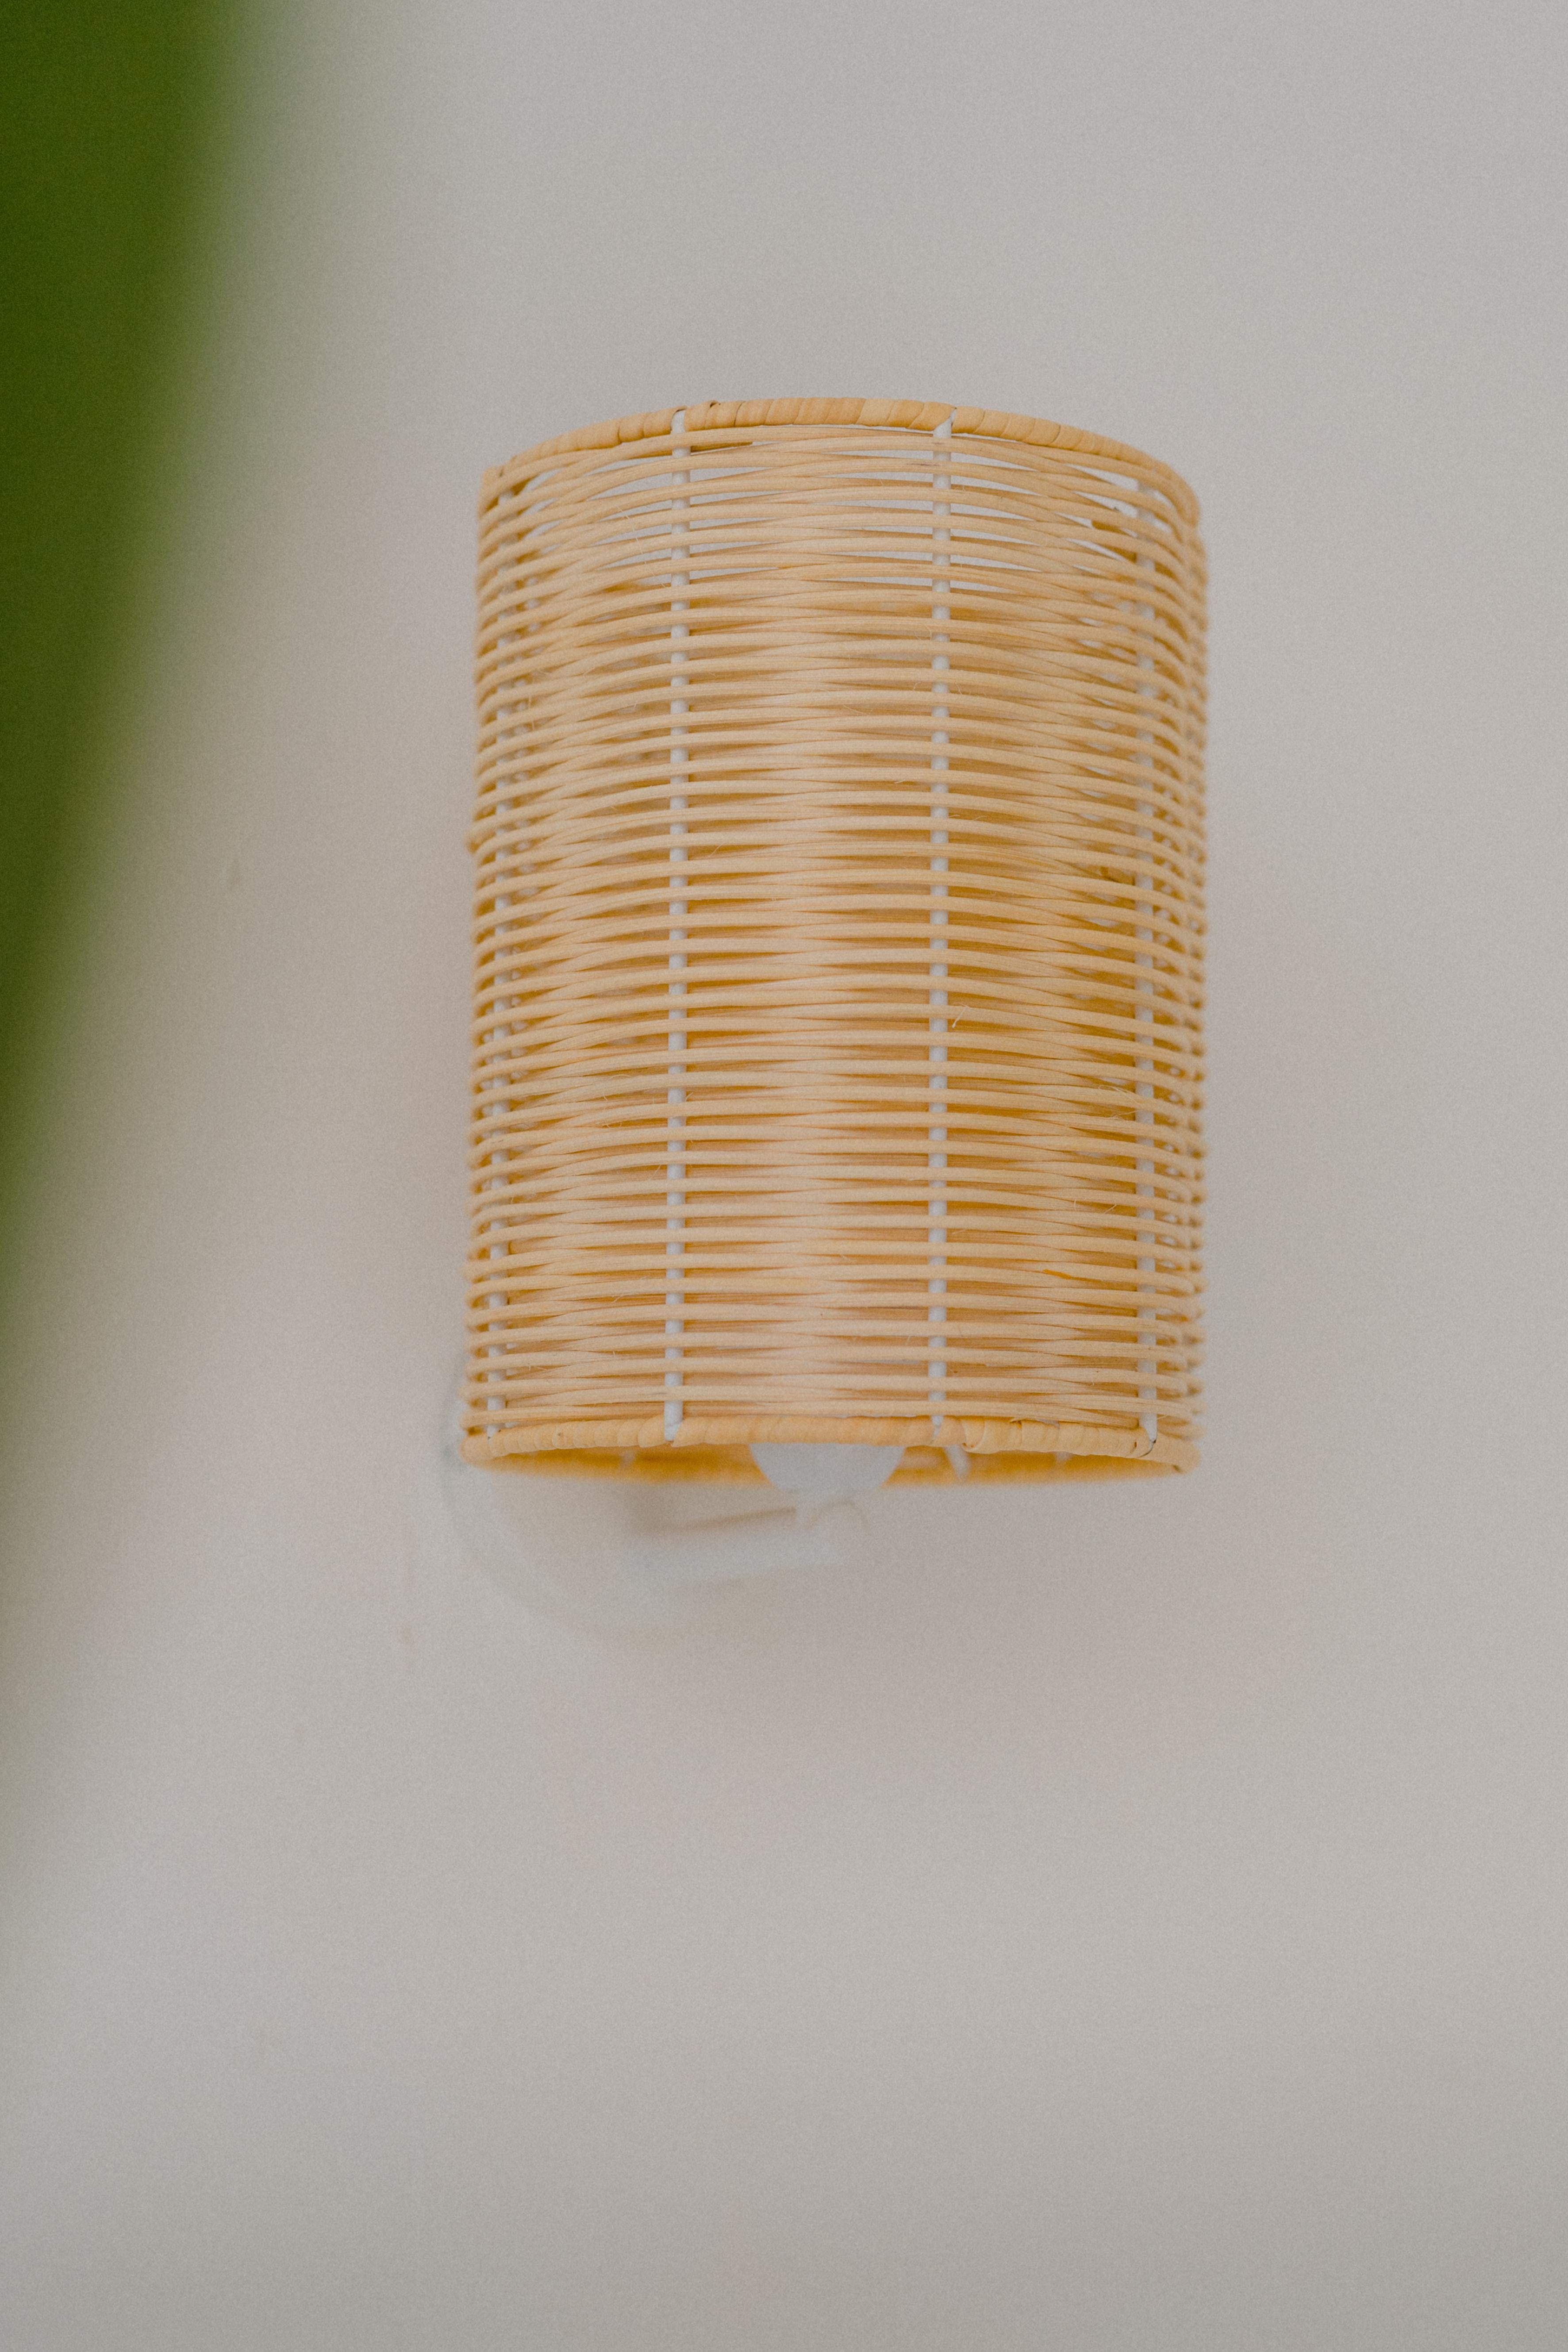 Modern Contemporary, Handmade, Wall Lamp, Rattan Cylinder, by Mediterranean Objects For Sale